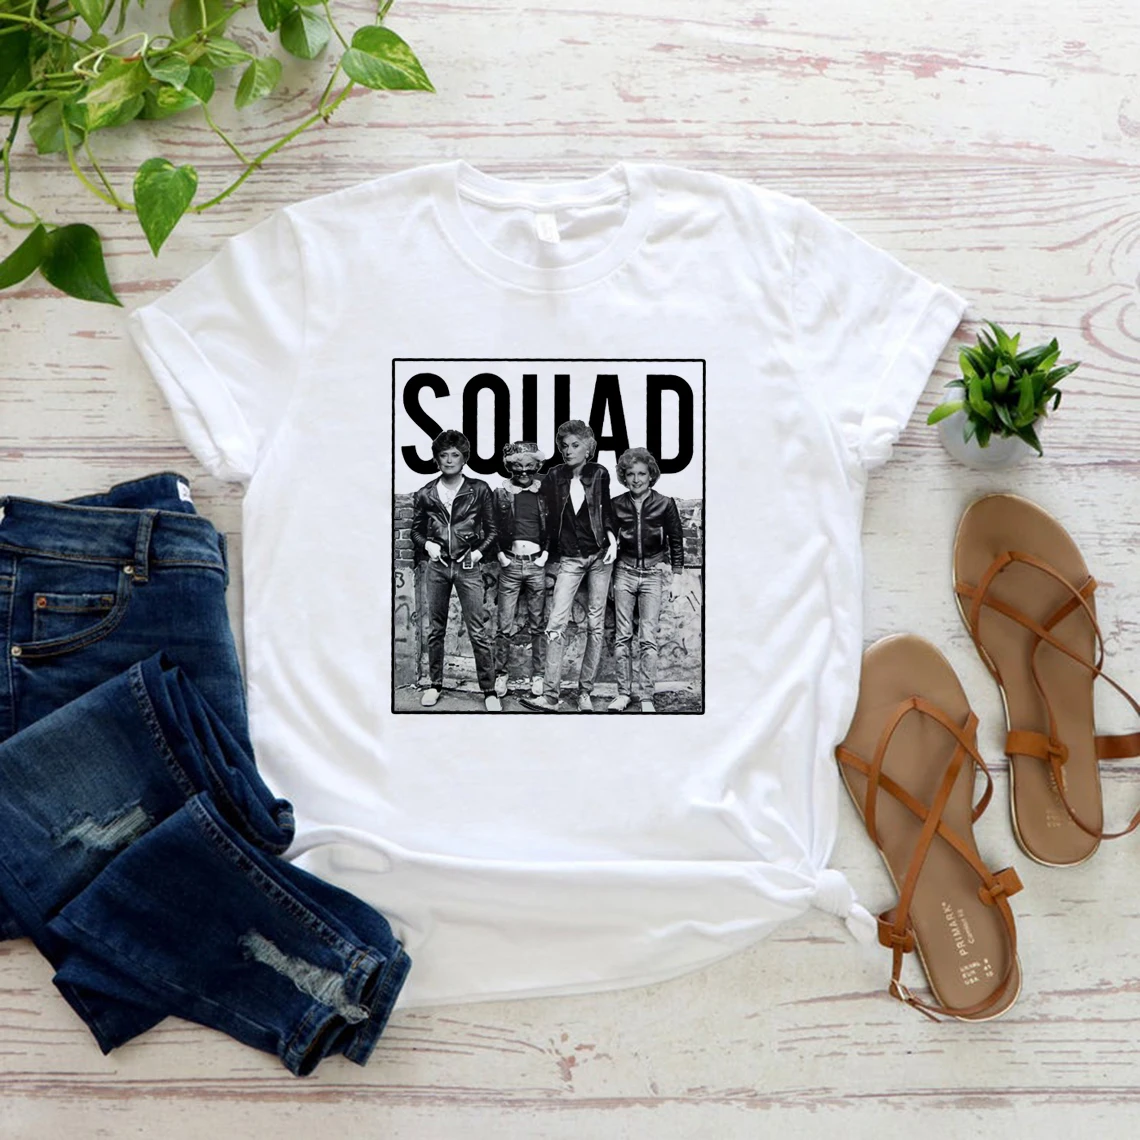 

Stay Golden Squad T-shirt Best Friends Squad Shirt Golden Girls Retro 80s Classic Tv Show Tee Graphic Oversized T Shirt